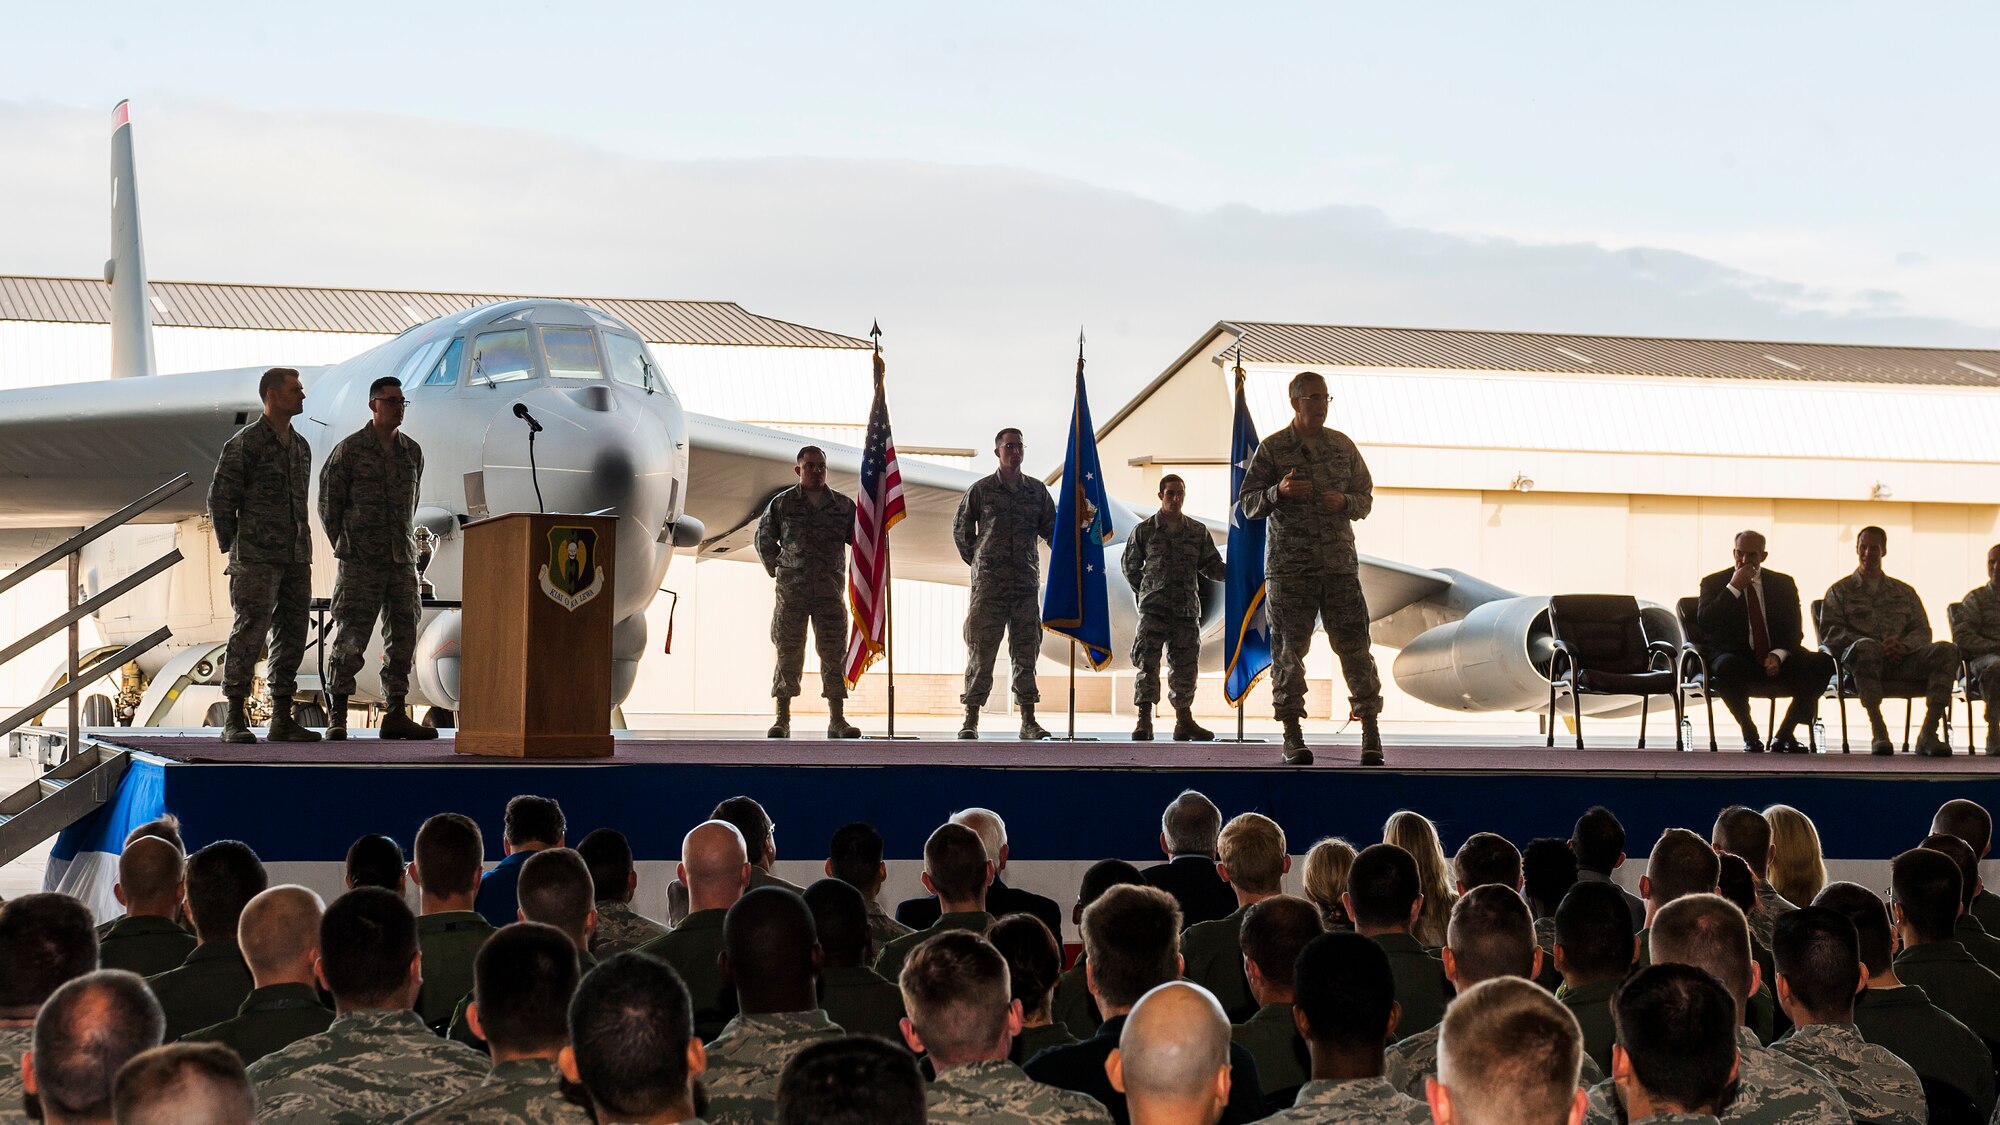 Gen. John E. Hyten, U.S. Strategic Command commander, speaks with 5th Bomb Wing Airmen about the Omaha Trophy at Minot Air Force Base, N.D., June 6, 2017. Hyten presented the 5th Bomb Wing with the 2016 Omaha Trophy in the Strategic Bomber category and recognized multiple Team Minot Airmen for their mission contributions. (U.S. Air Force photo/Senior Airman J.T. Armstrong)
